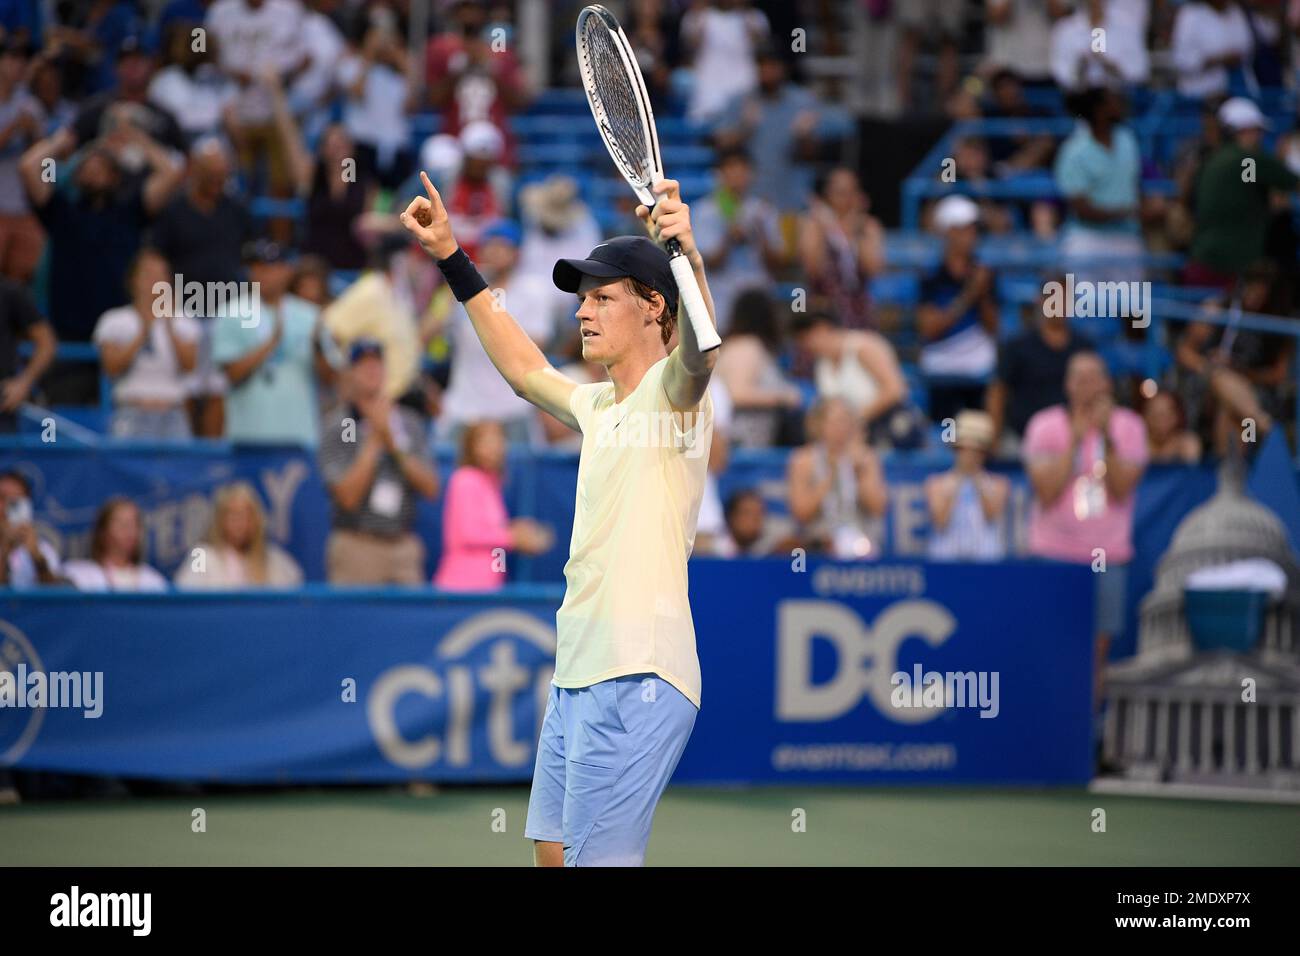 Jannik Sinner, of Italy, celebrates after he beat Mackenzie McDonald, of the United States, in the singles final at the Citi Open tennis tournament Sunday, Aug